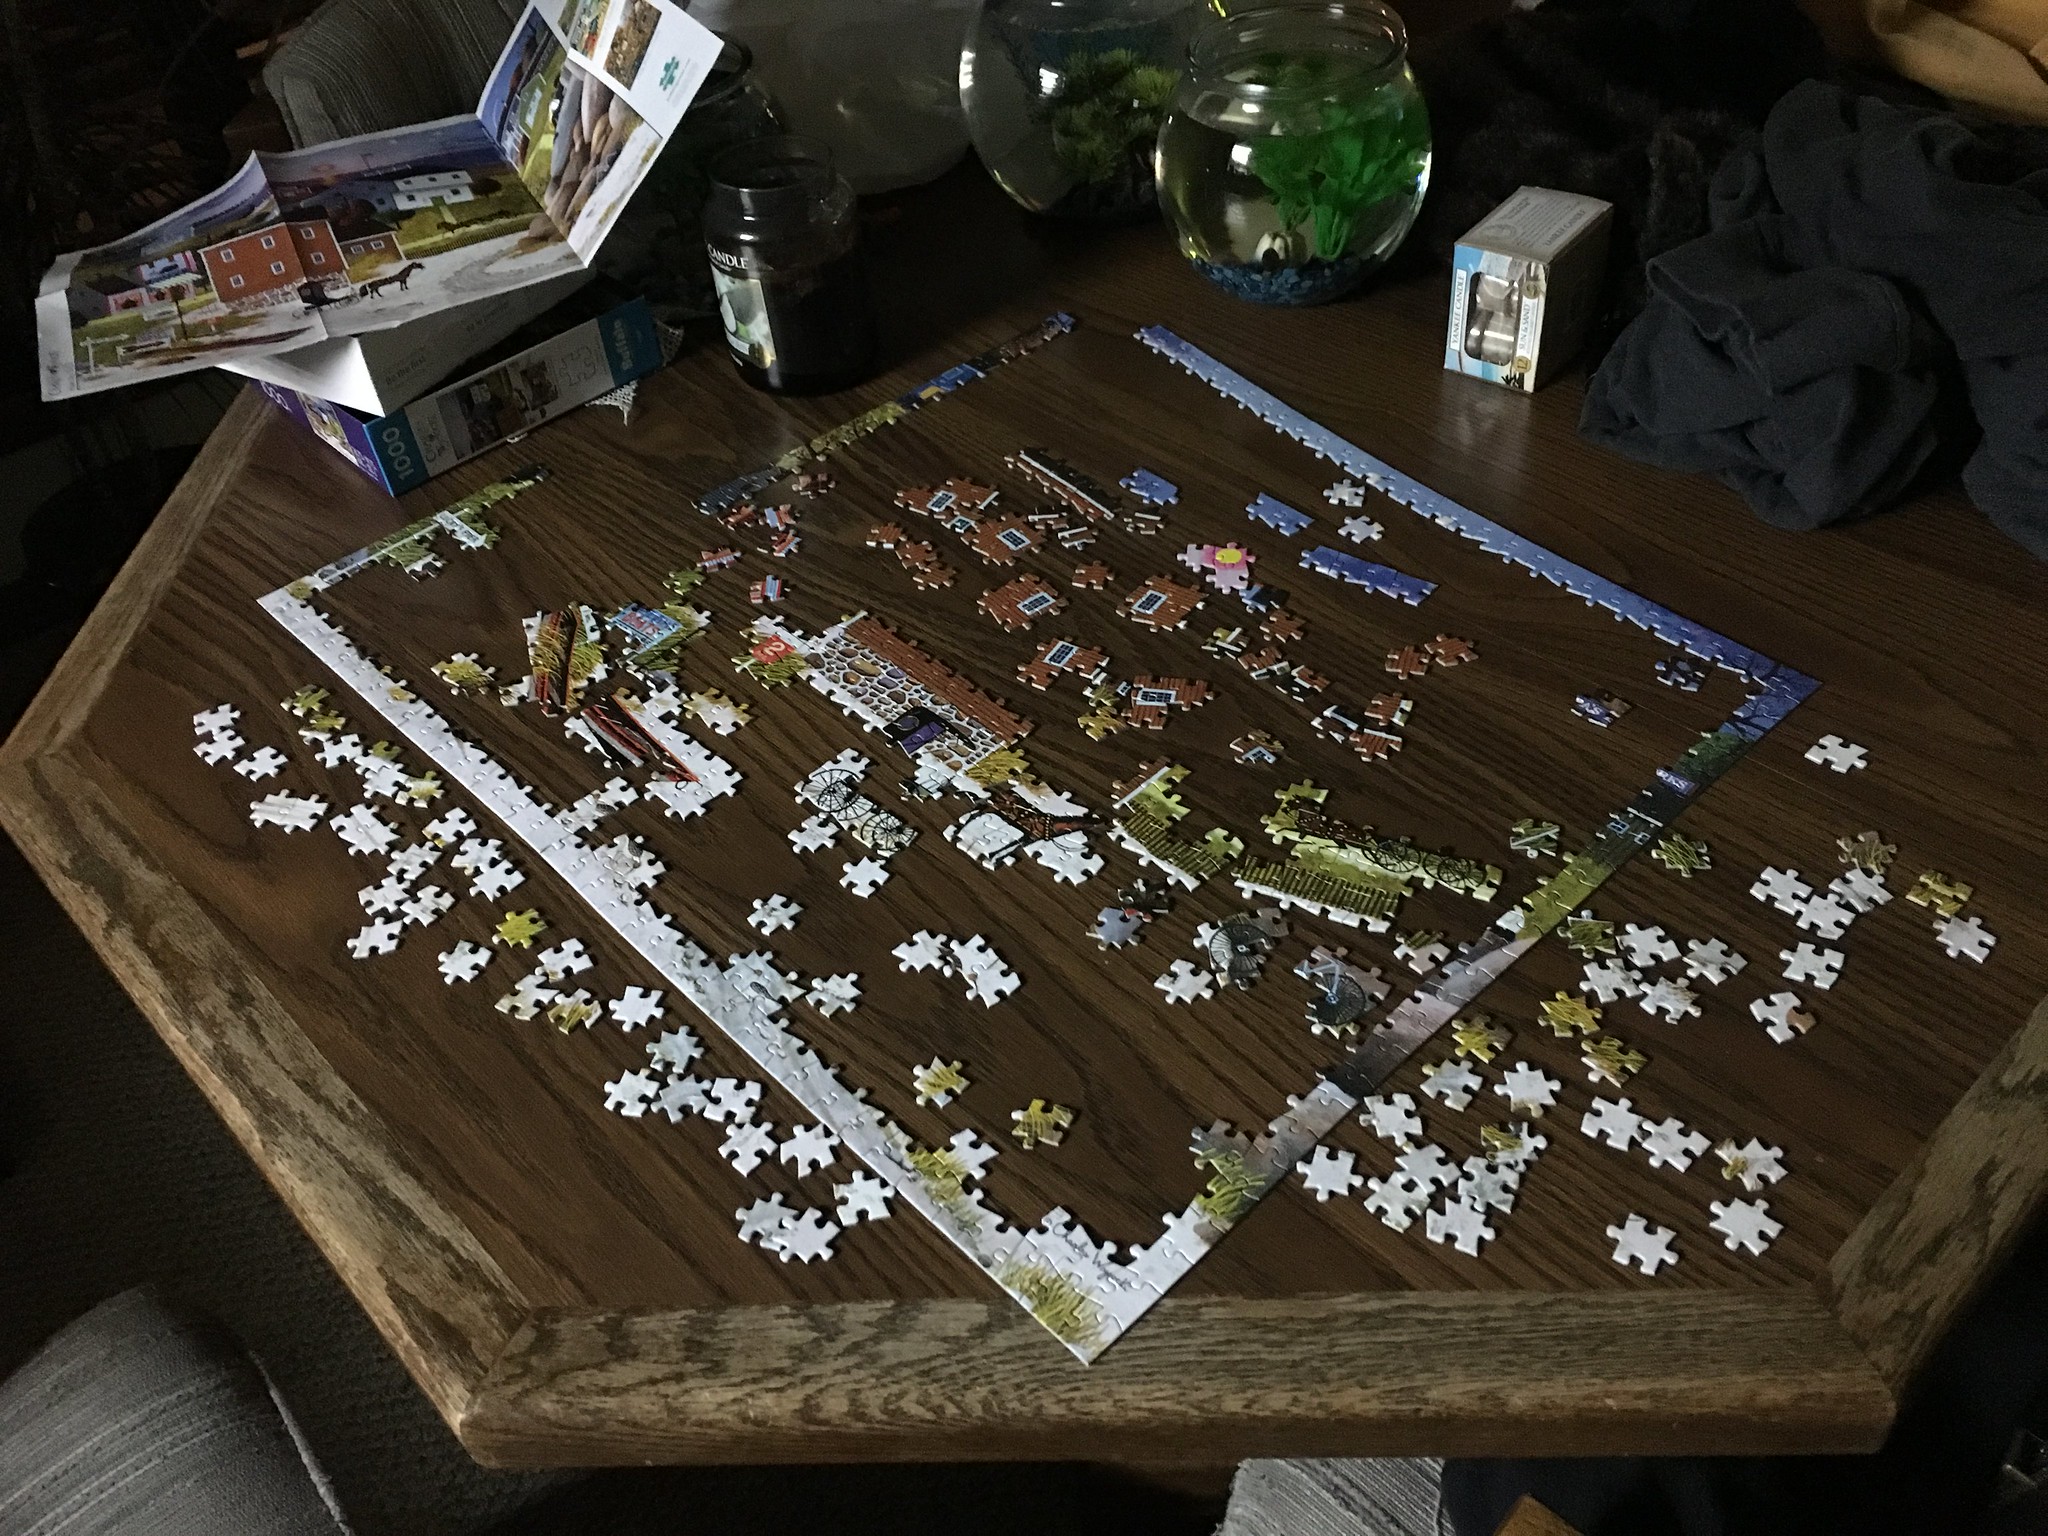 That puzzle isn't doing itself